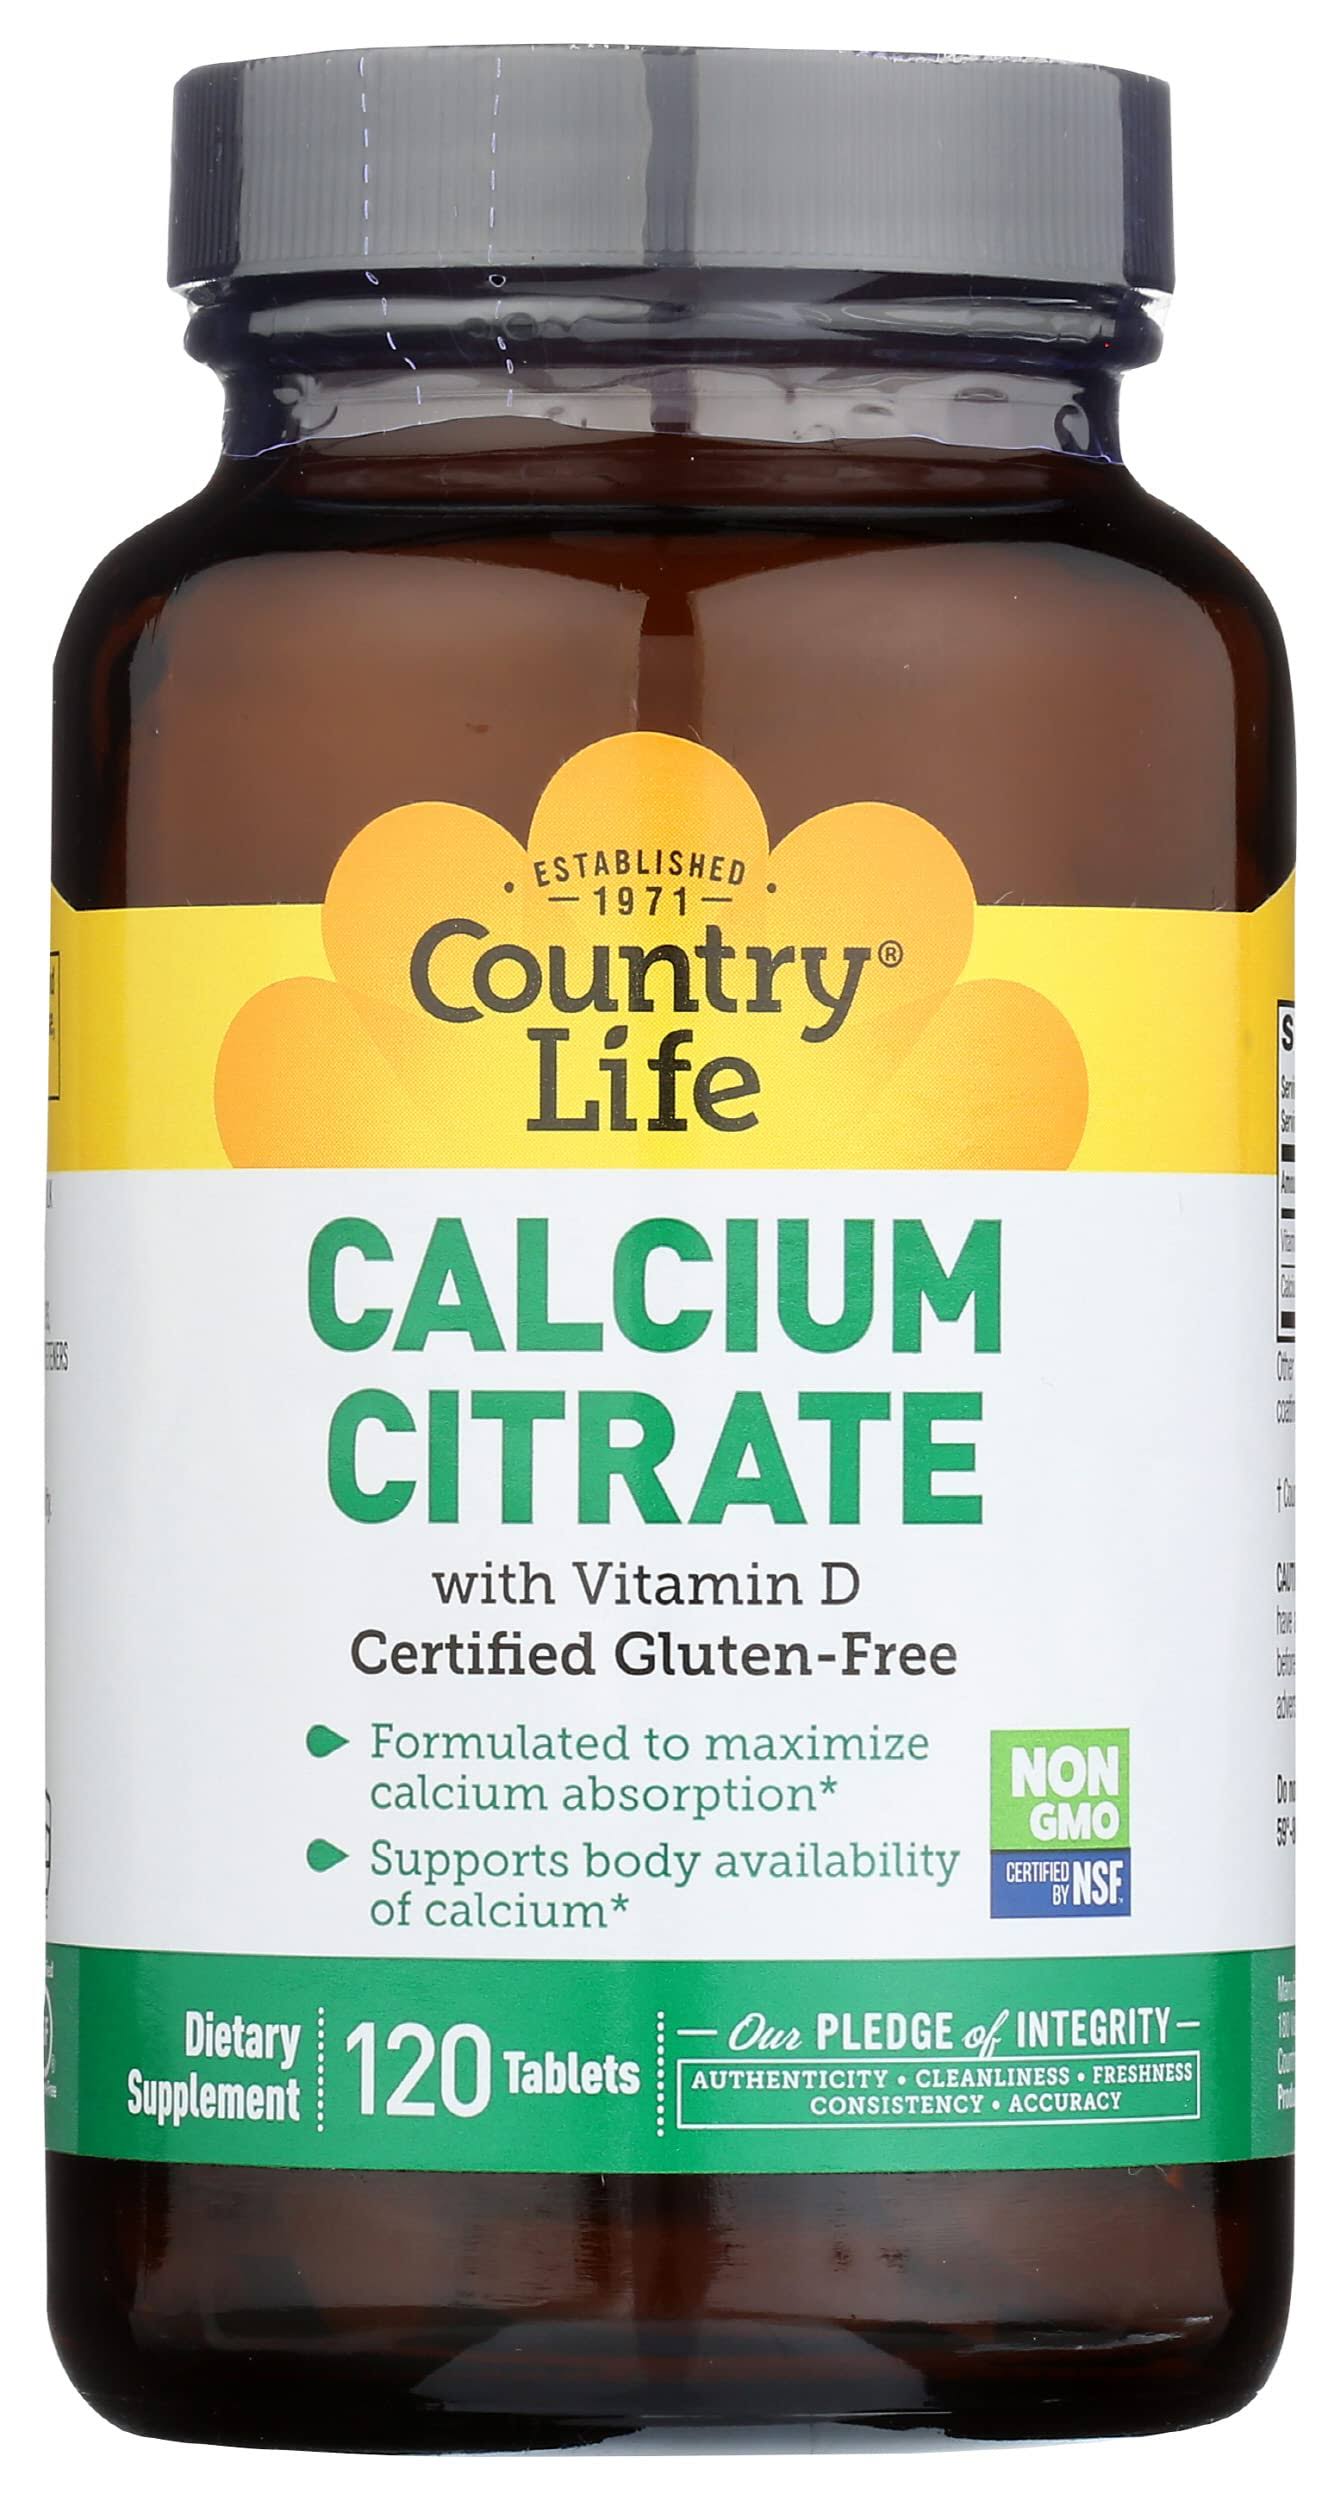 Country Life Calcium Citrate Supplement - with Vitamin D, 120 Tablets